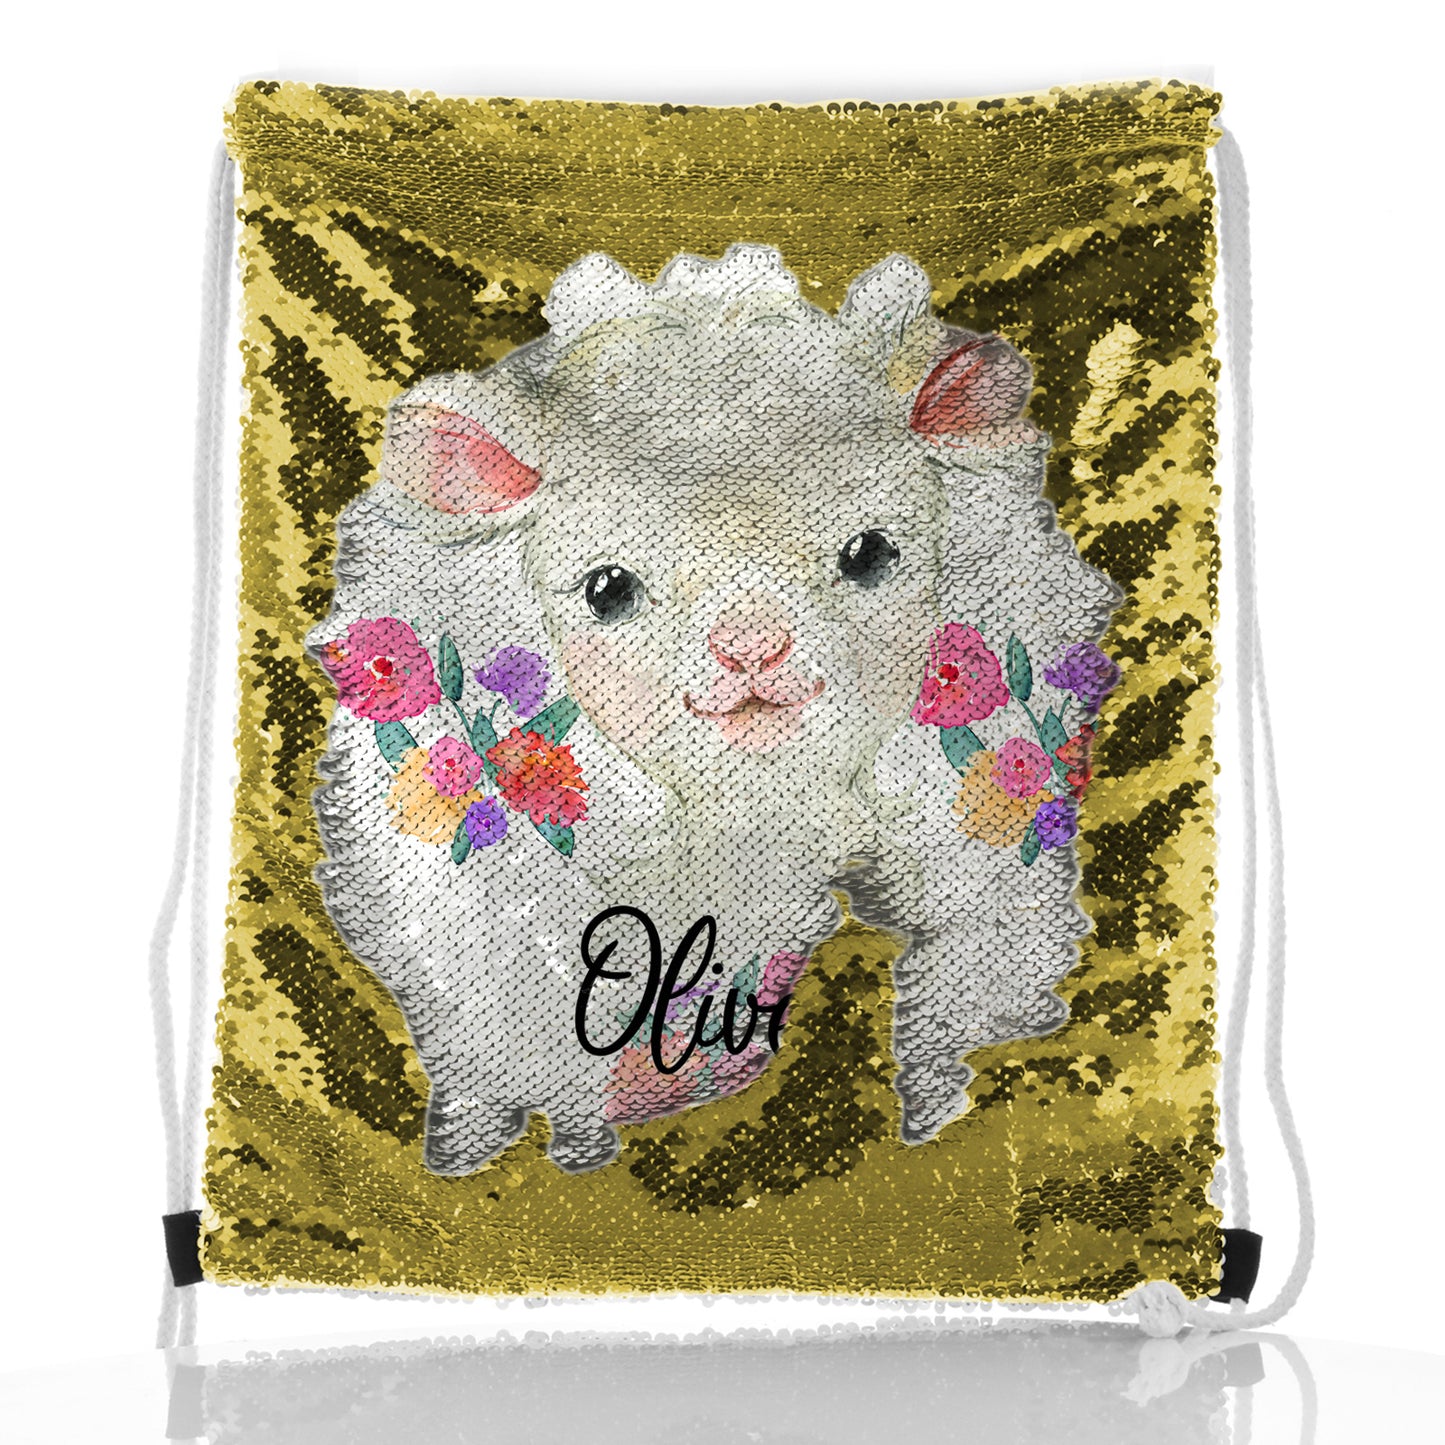 Personalised Sequin Drawstring Backpack with White Lamb Flowers and Cute Text